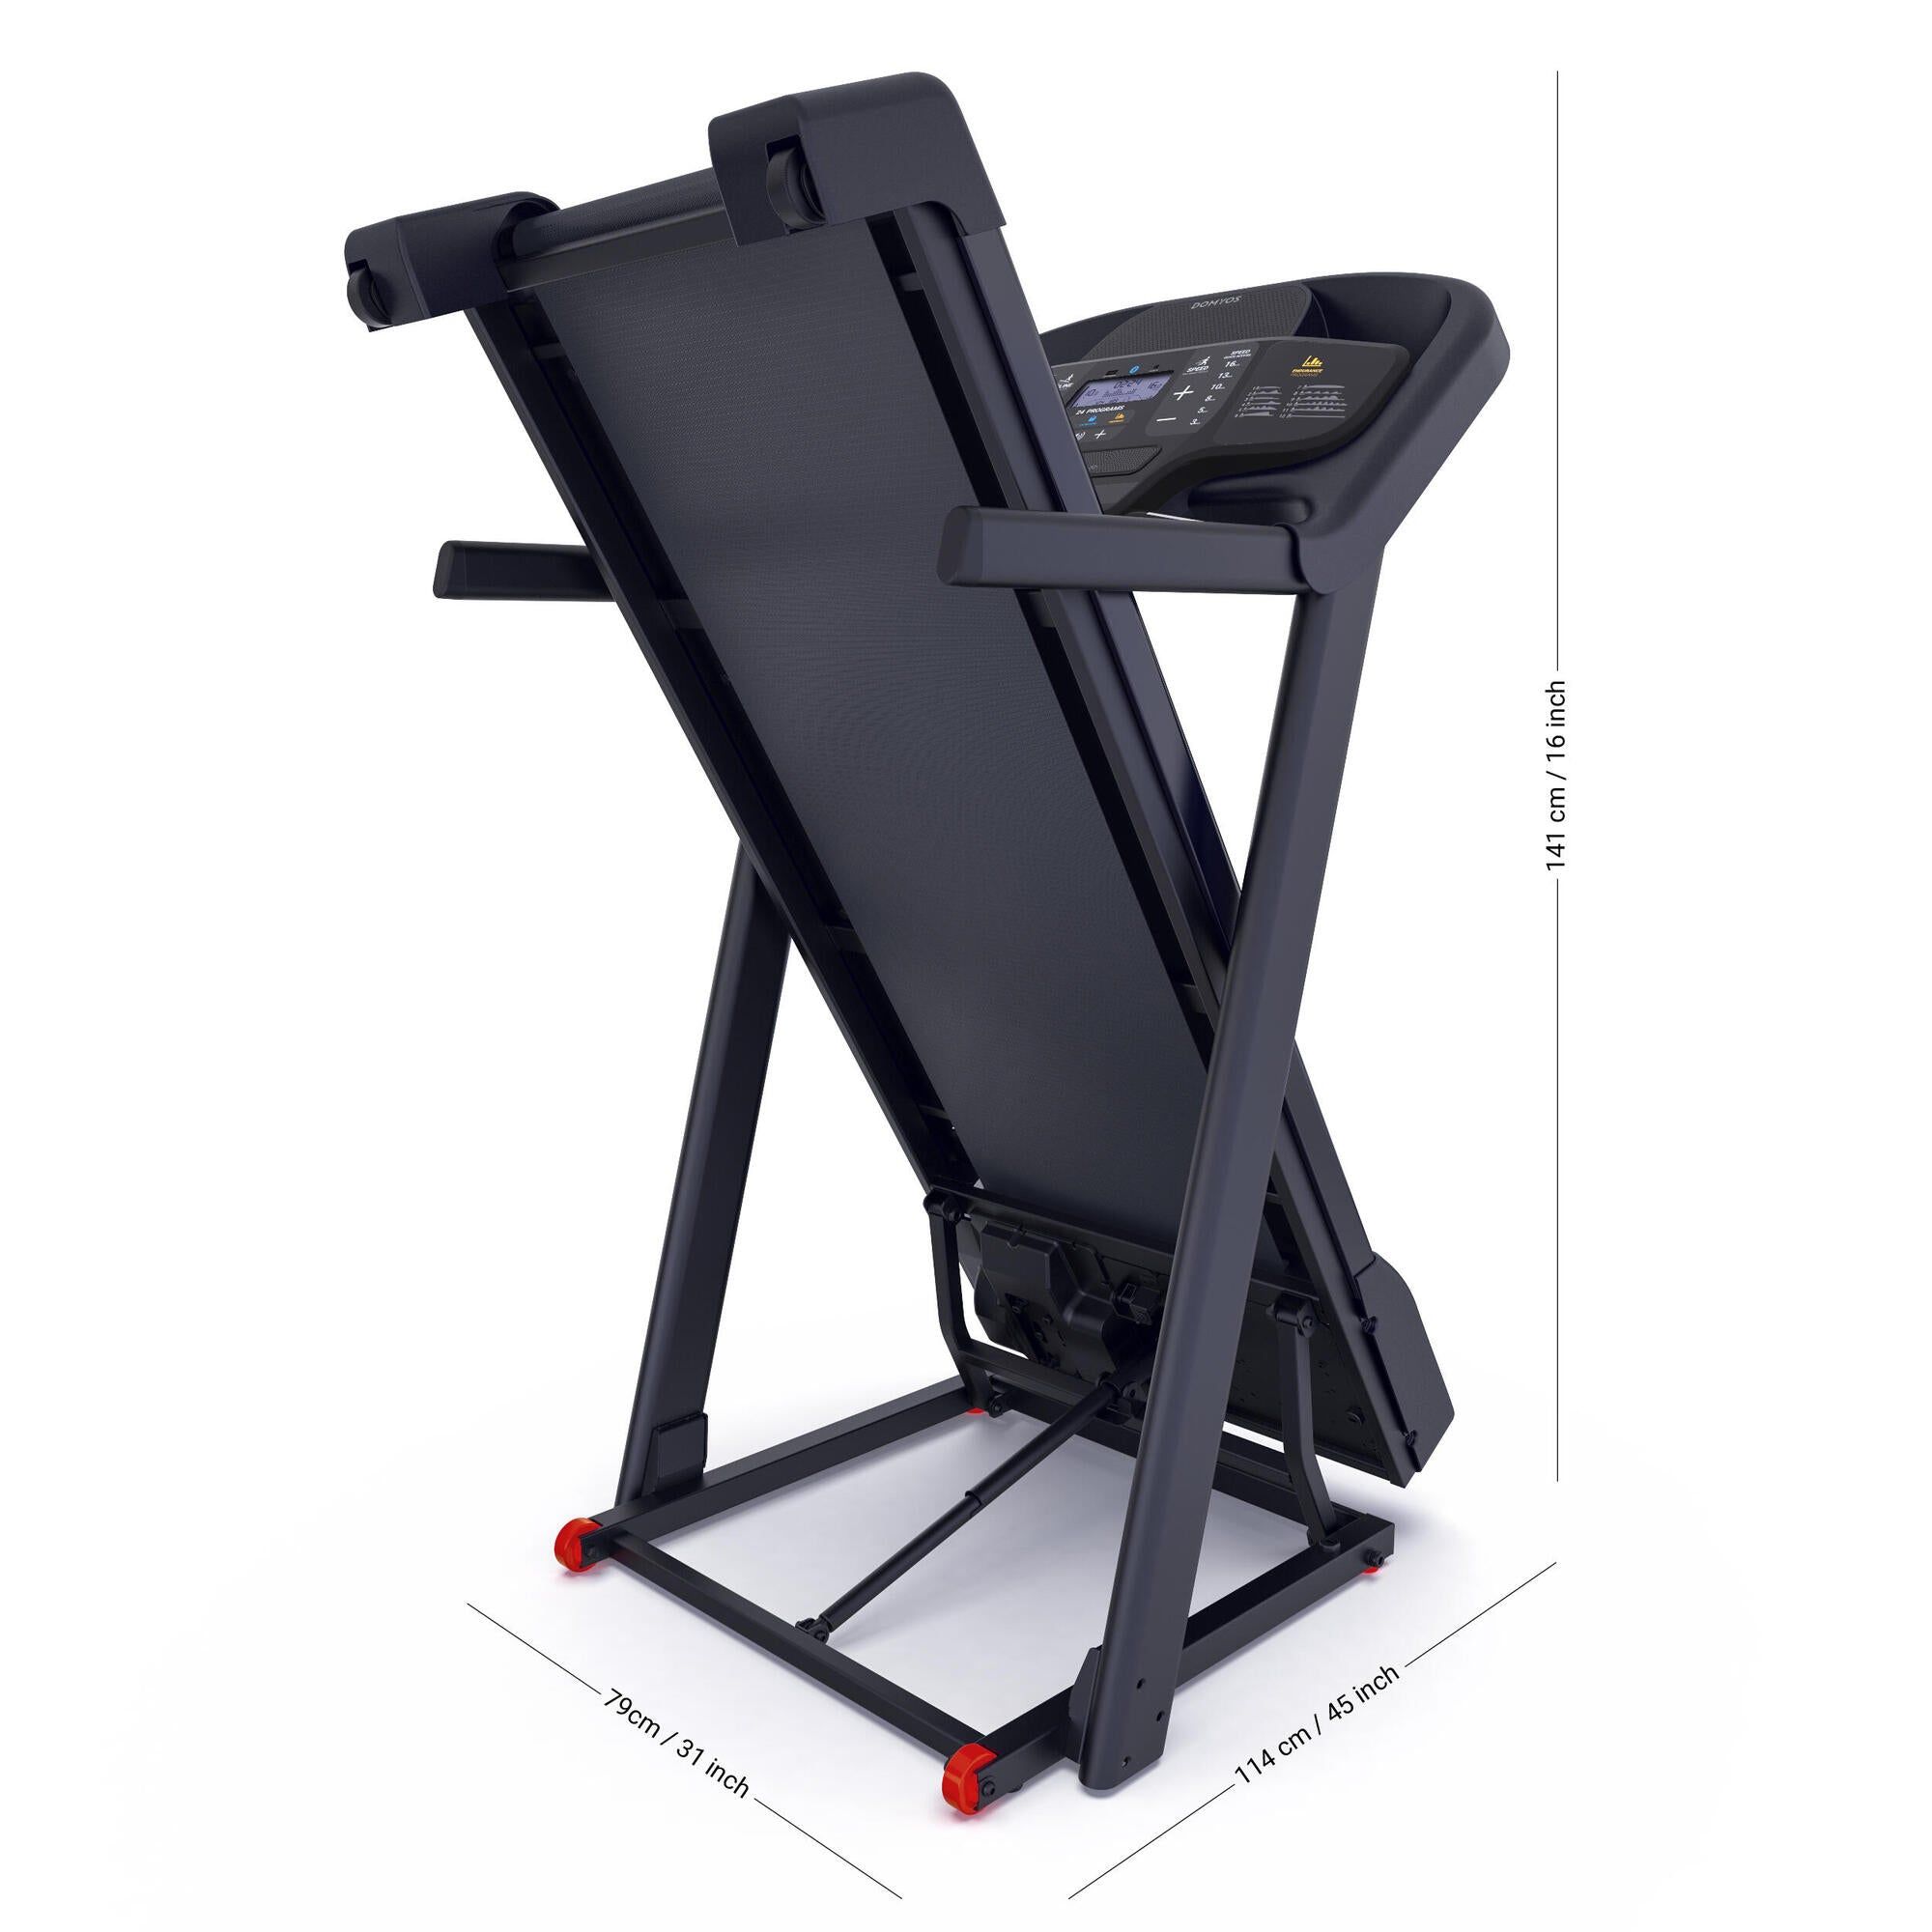 Domyos T540C Foldable Smart Connect Treadmill in Unspecified